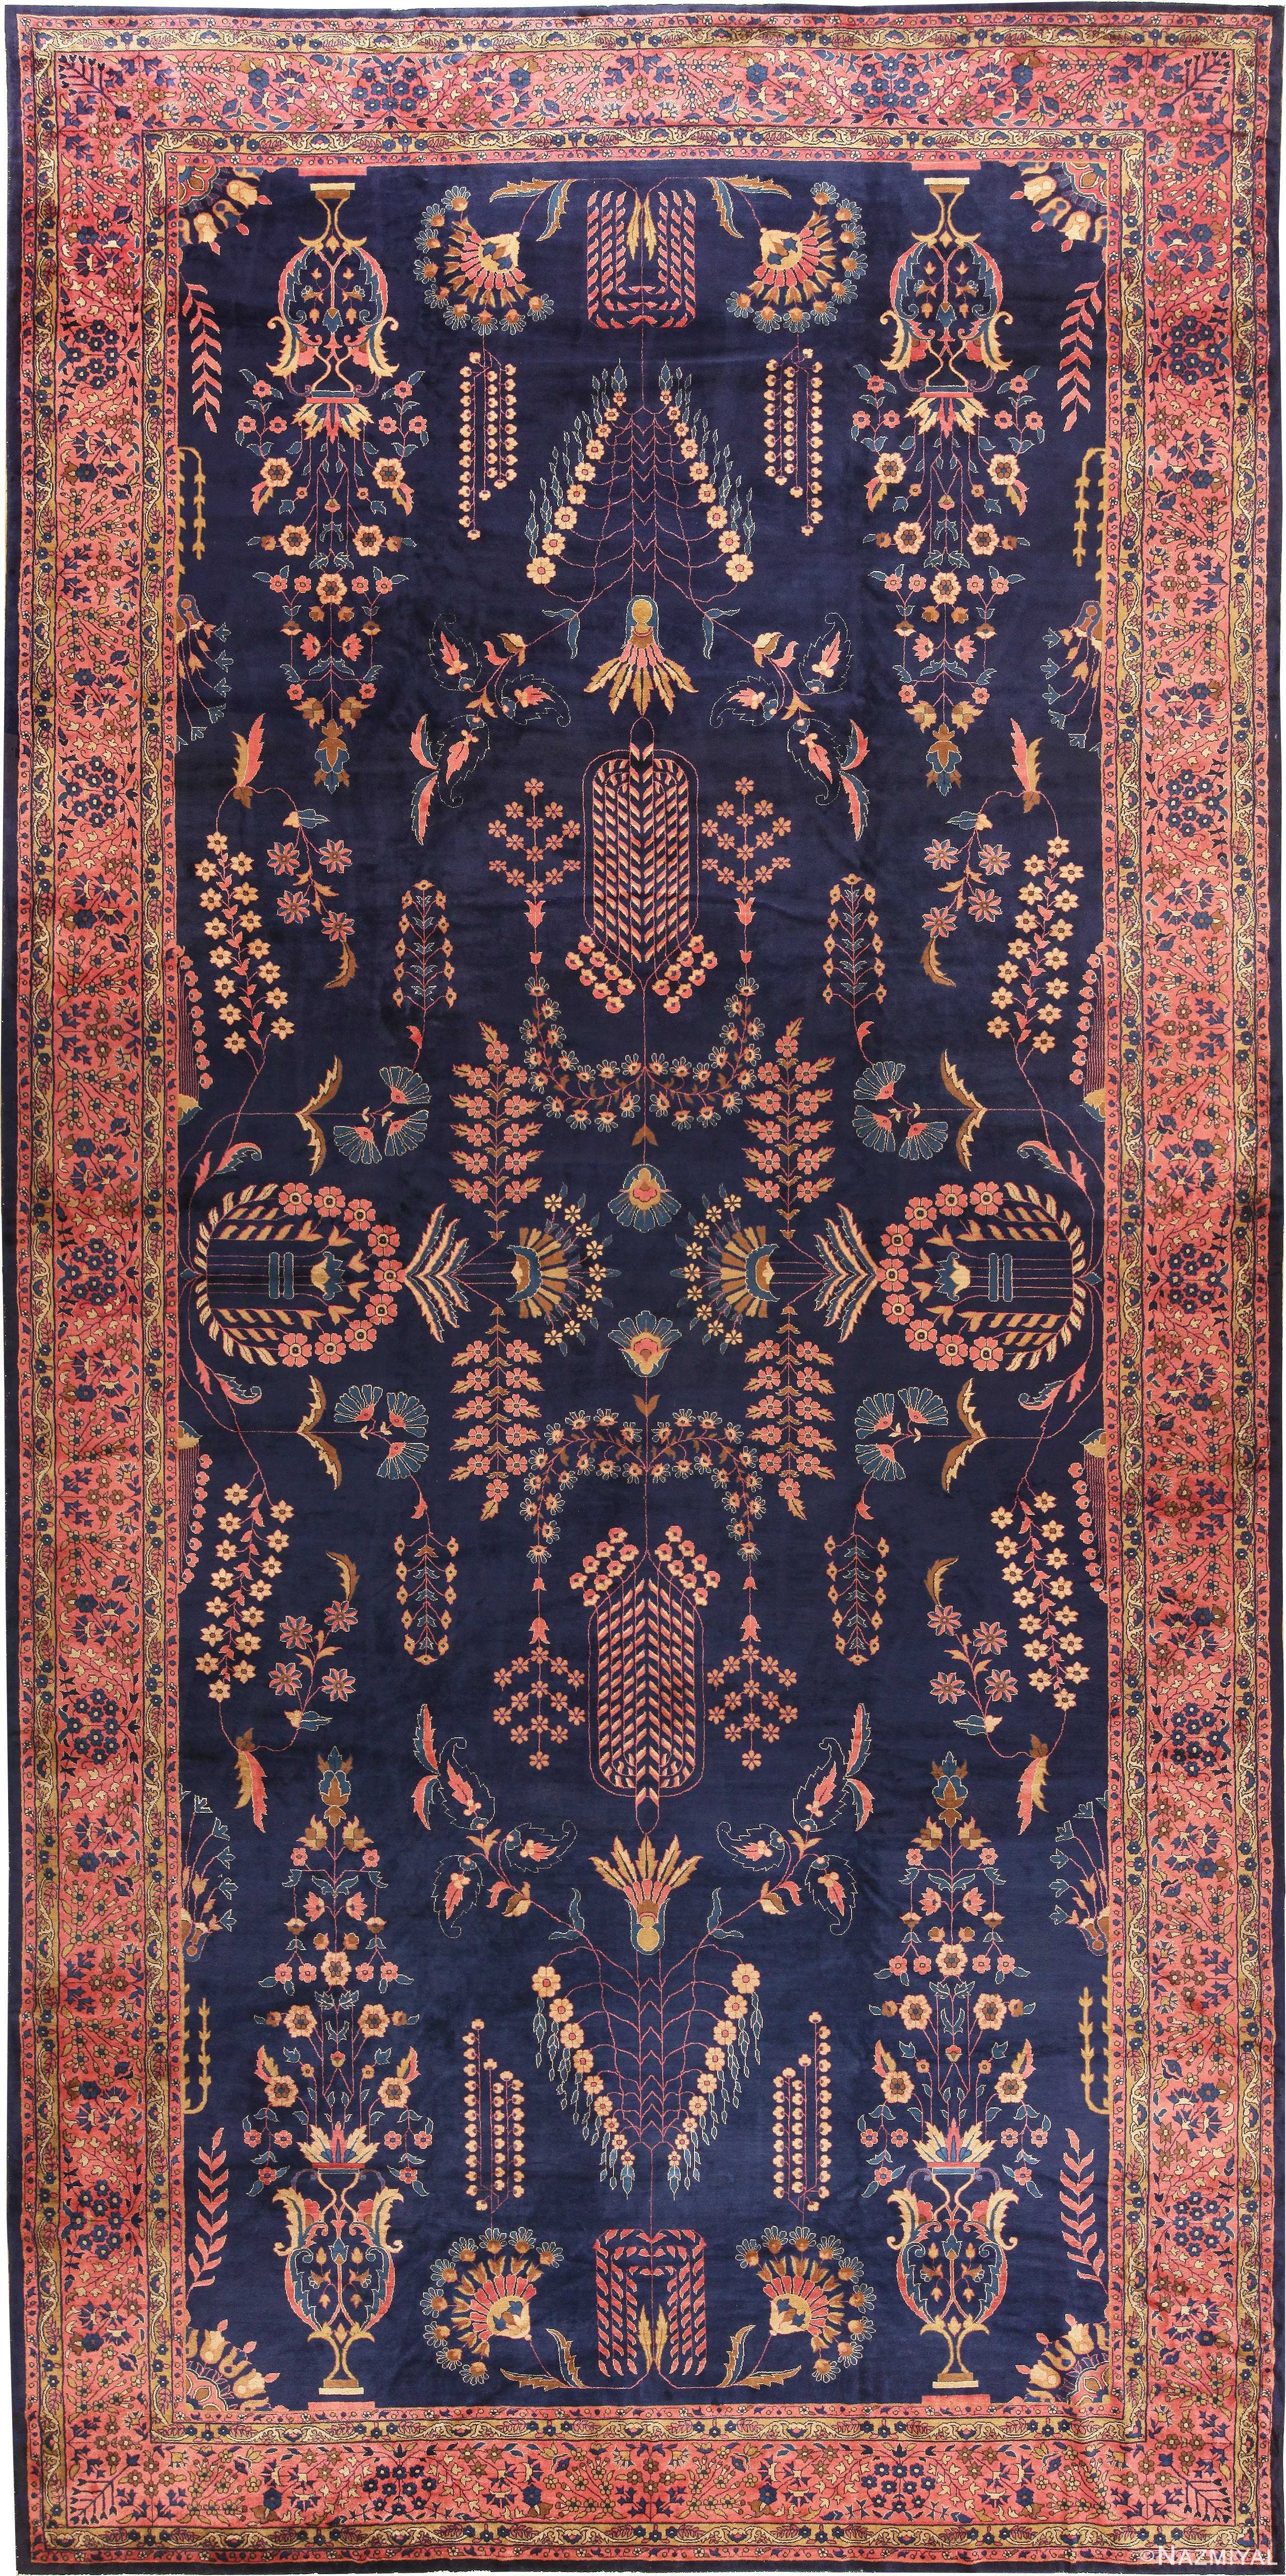 Blue Antique Indian Area Rug 70880, Navy Blue And Brown Area Rugs